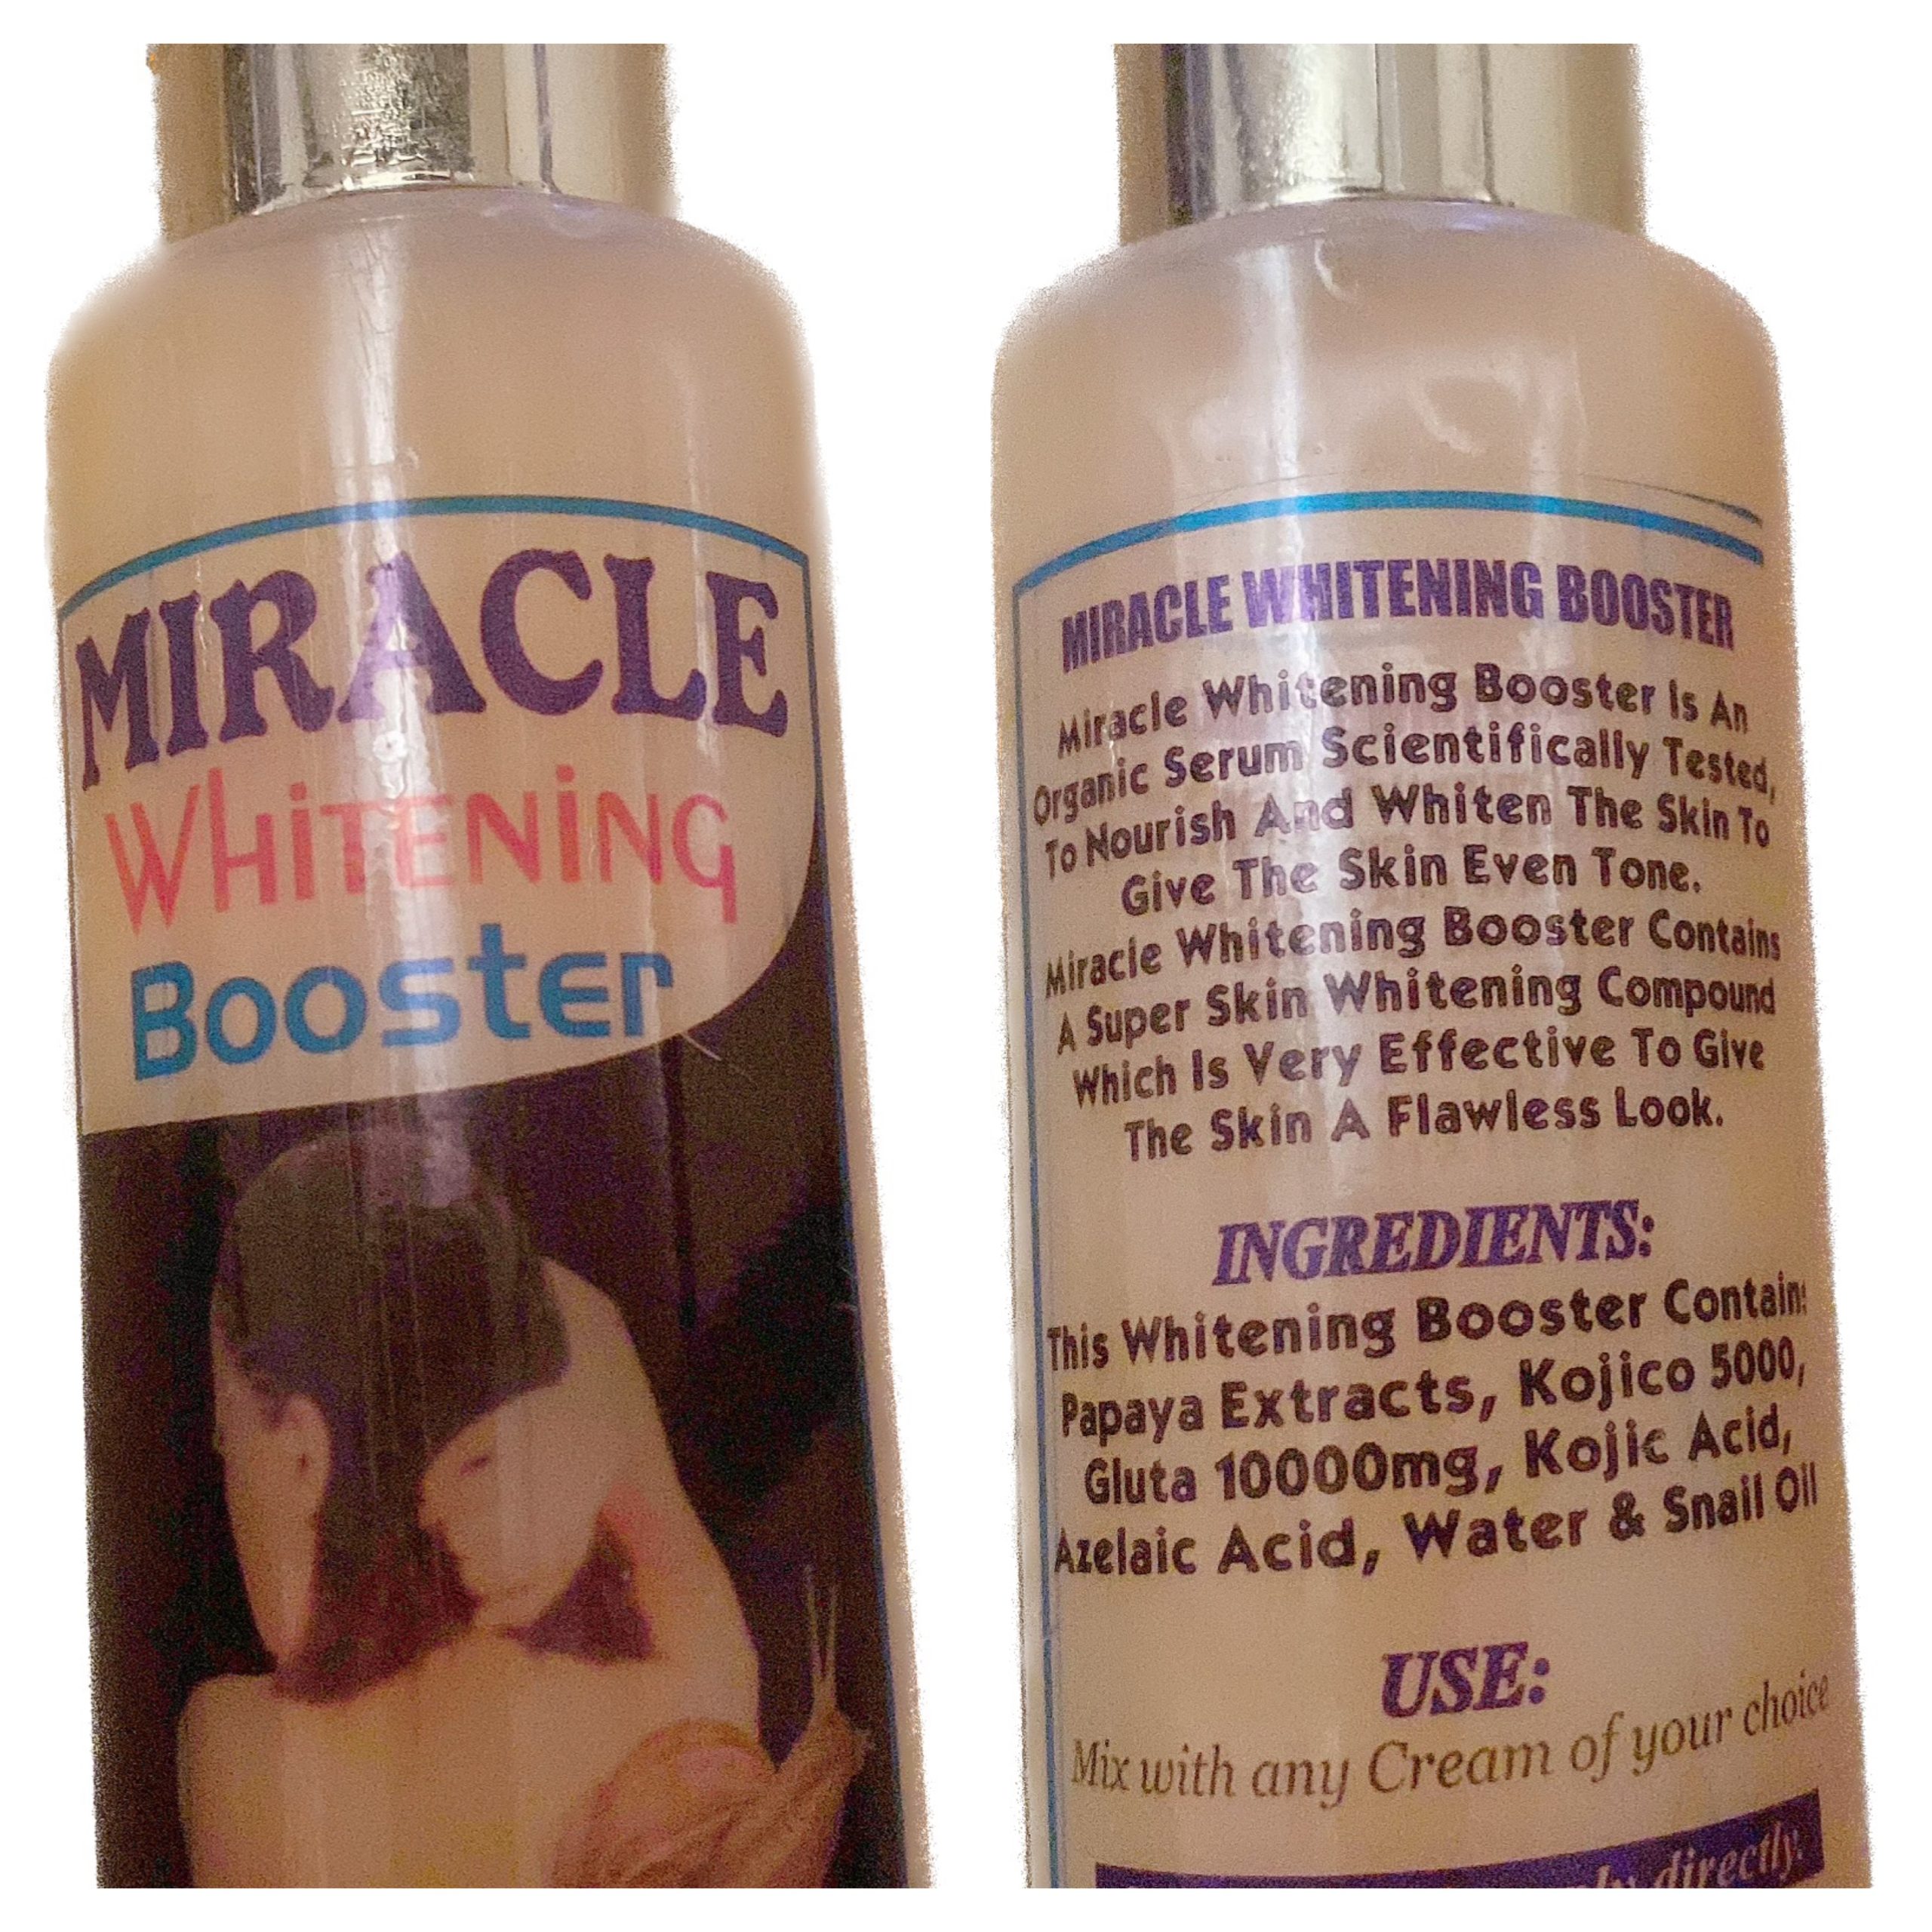 Miracle Whitening booster